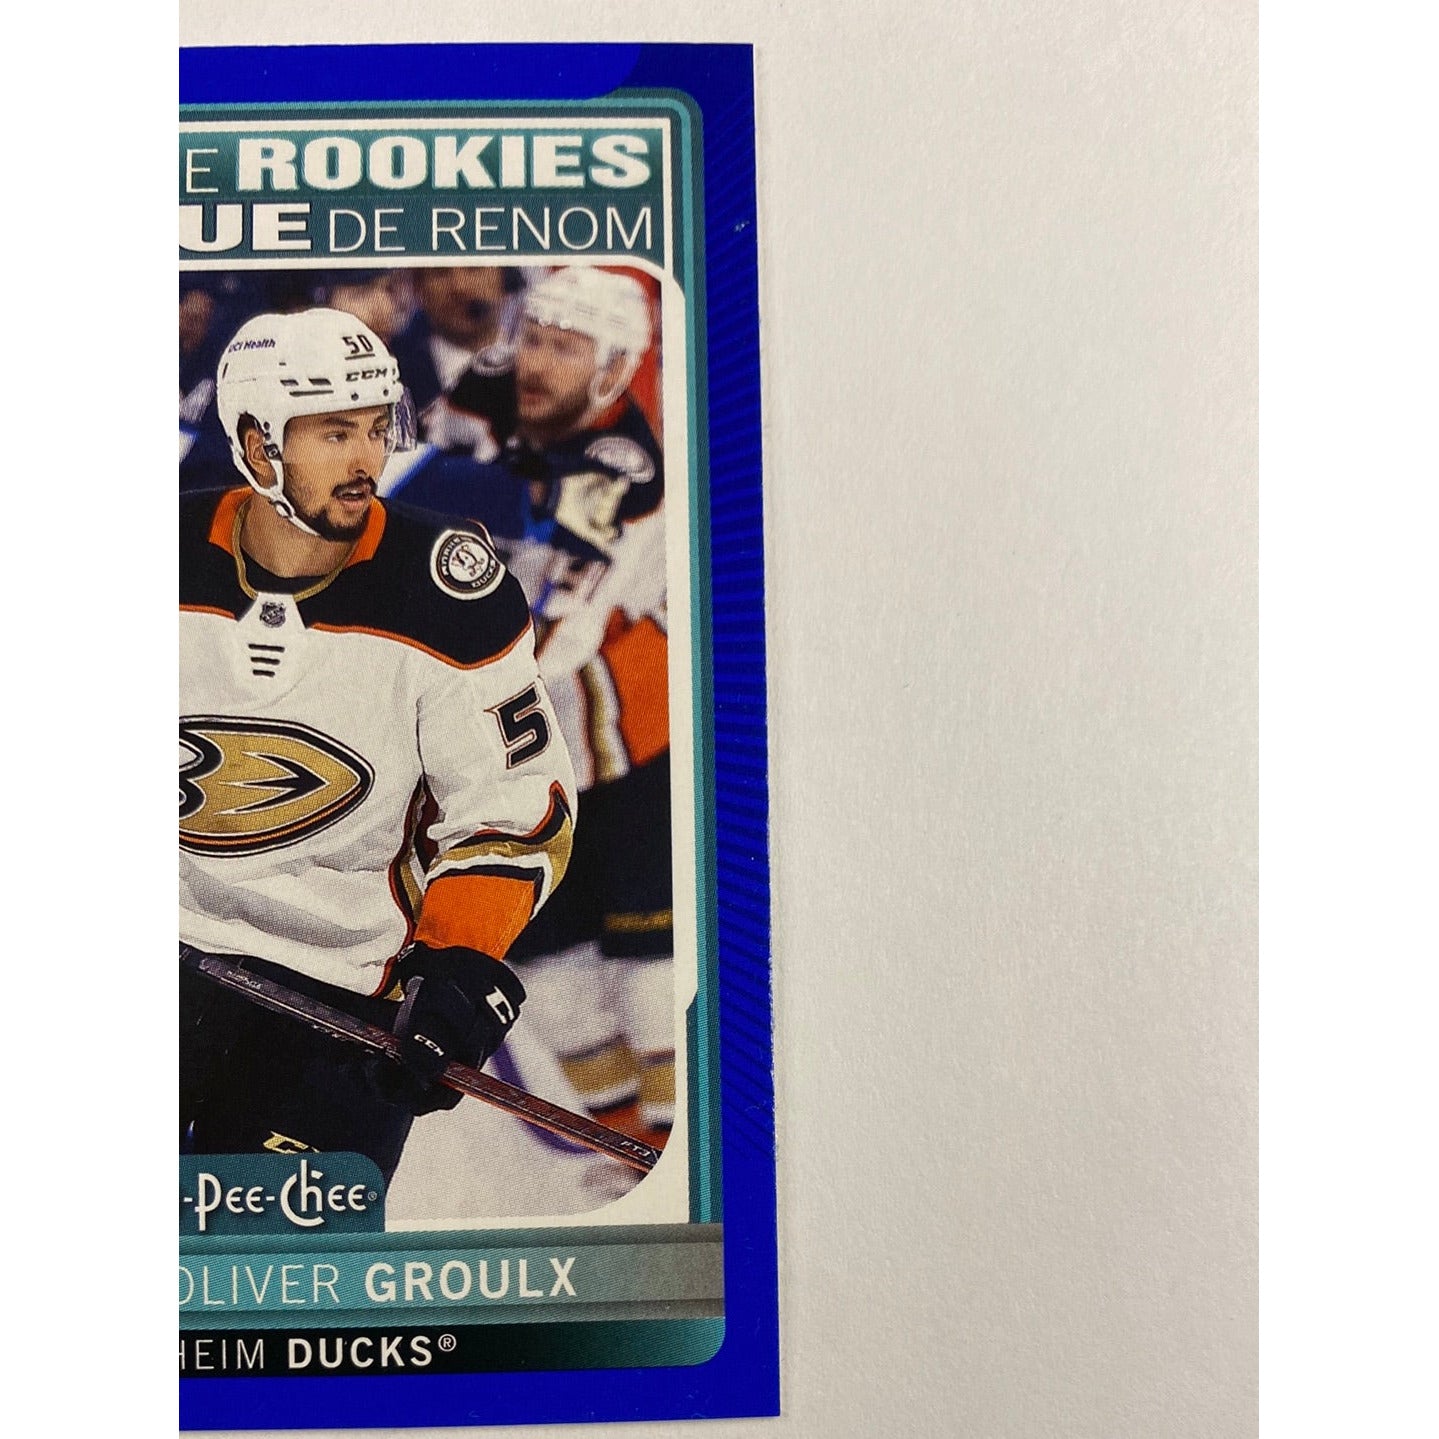 2021-22 O-Pee-Chee Benoit-Olivier Groulx Blue Boarder Marquee Rookies